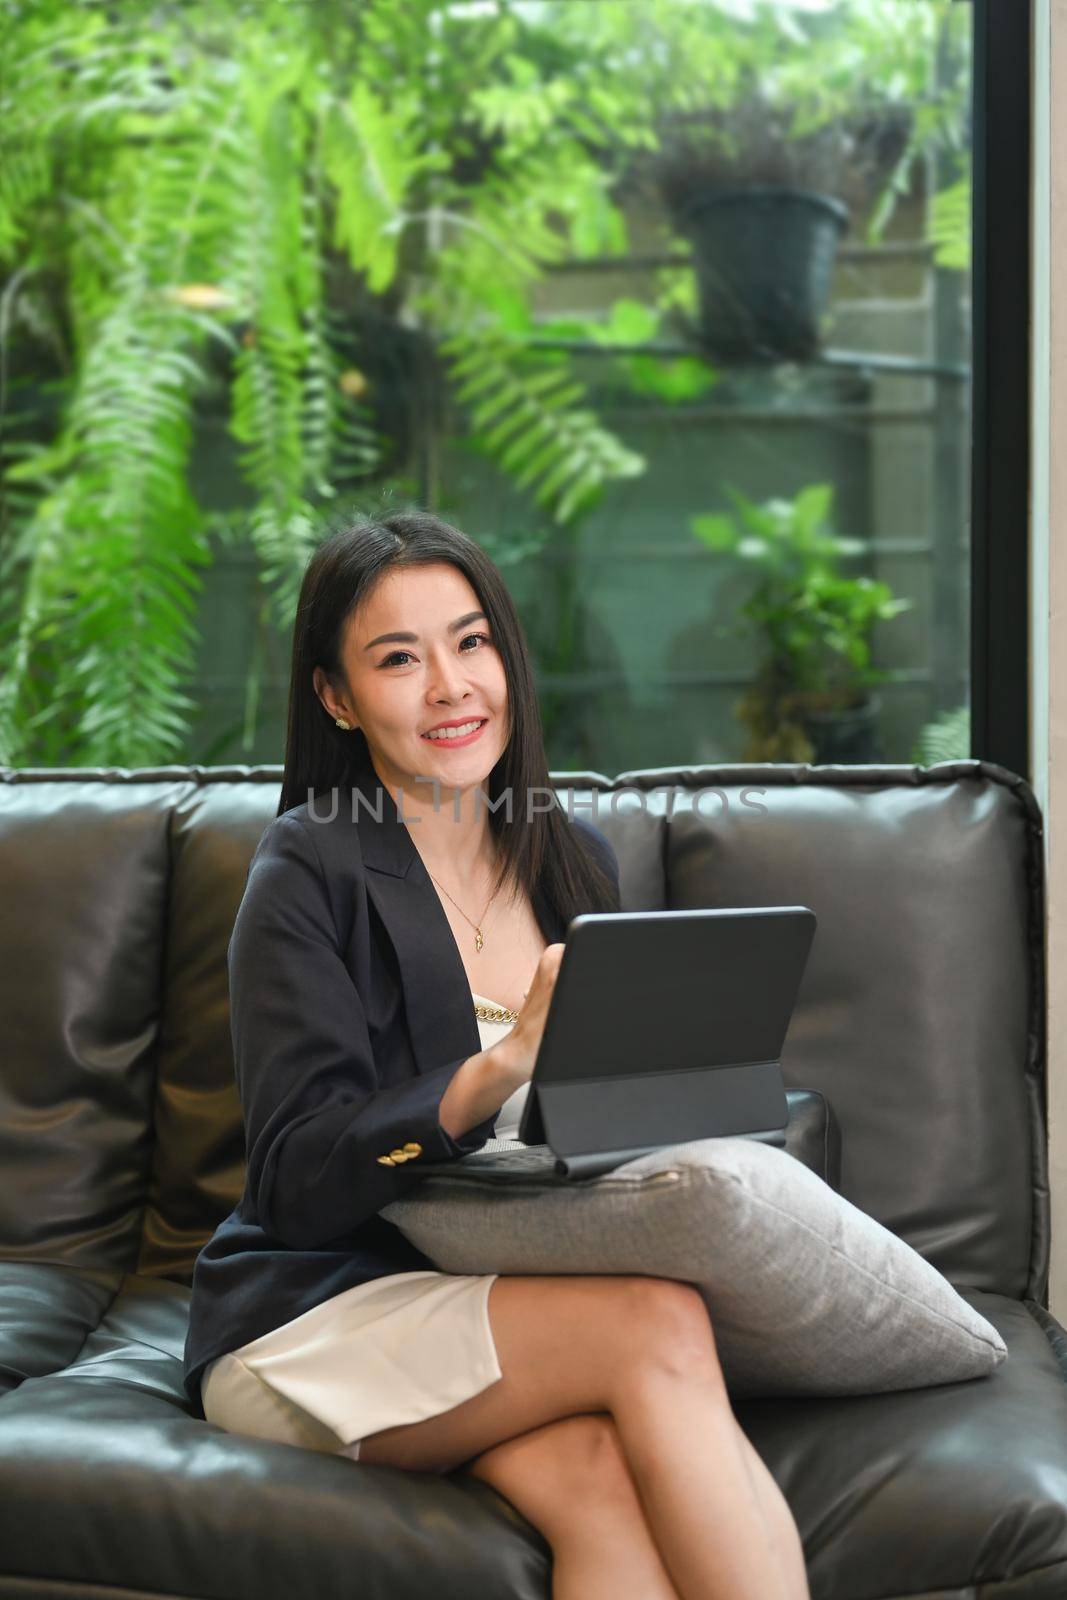 Attractive female entrepreneur sitting on couch in her office and using digital tablet.